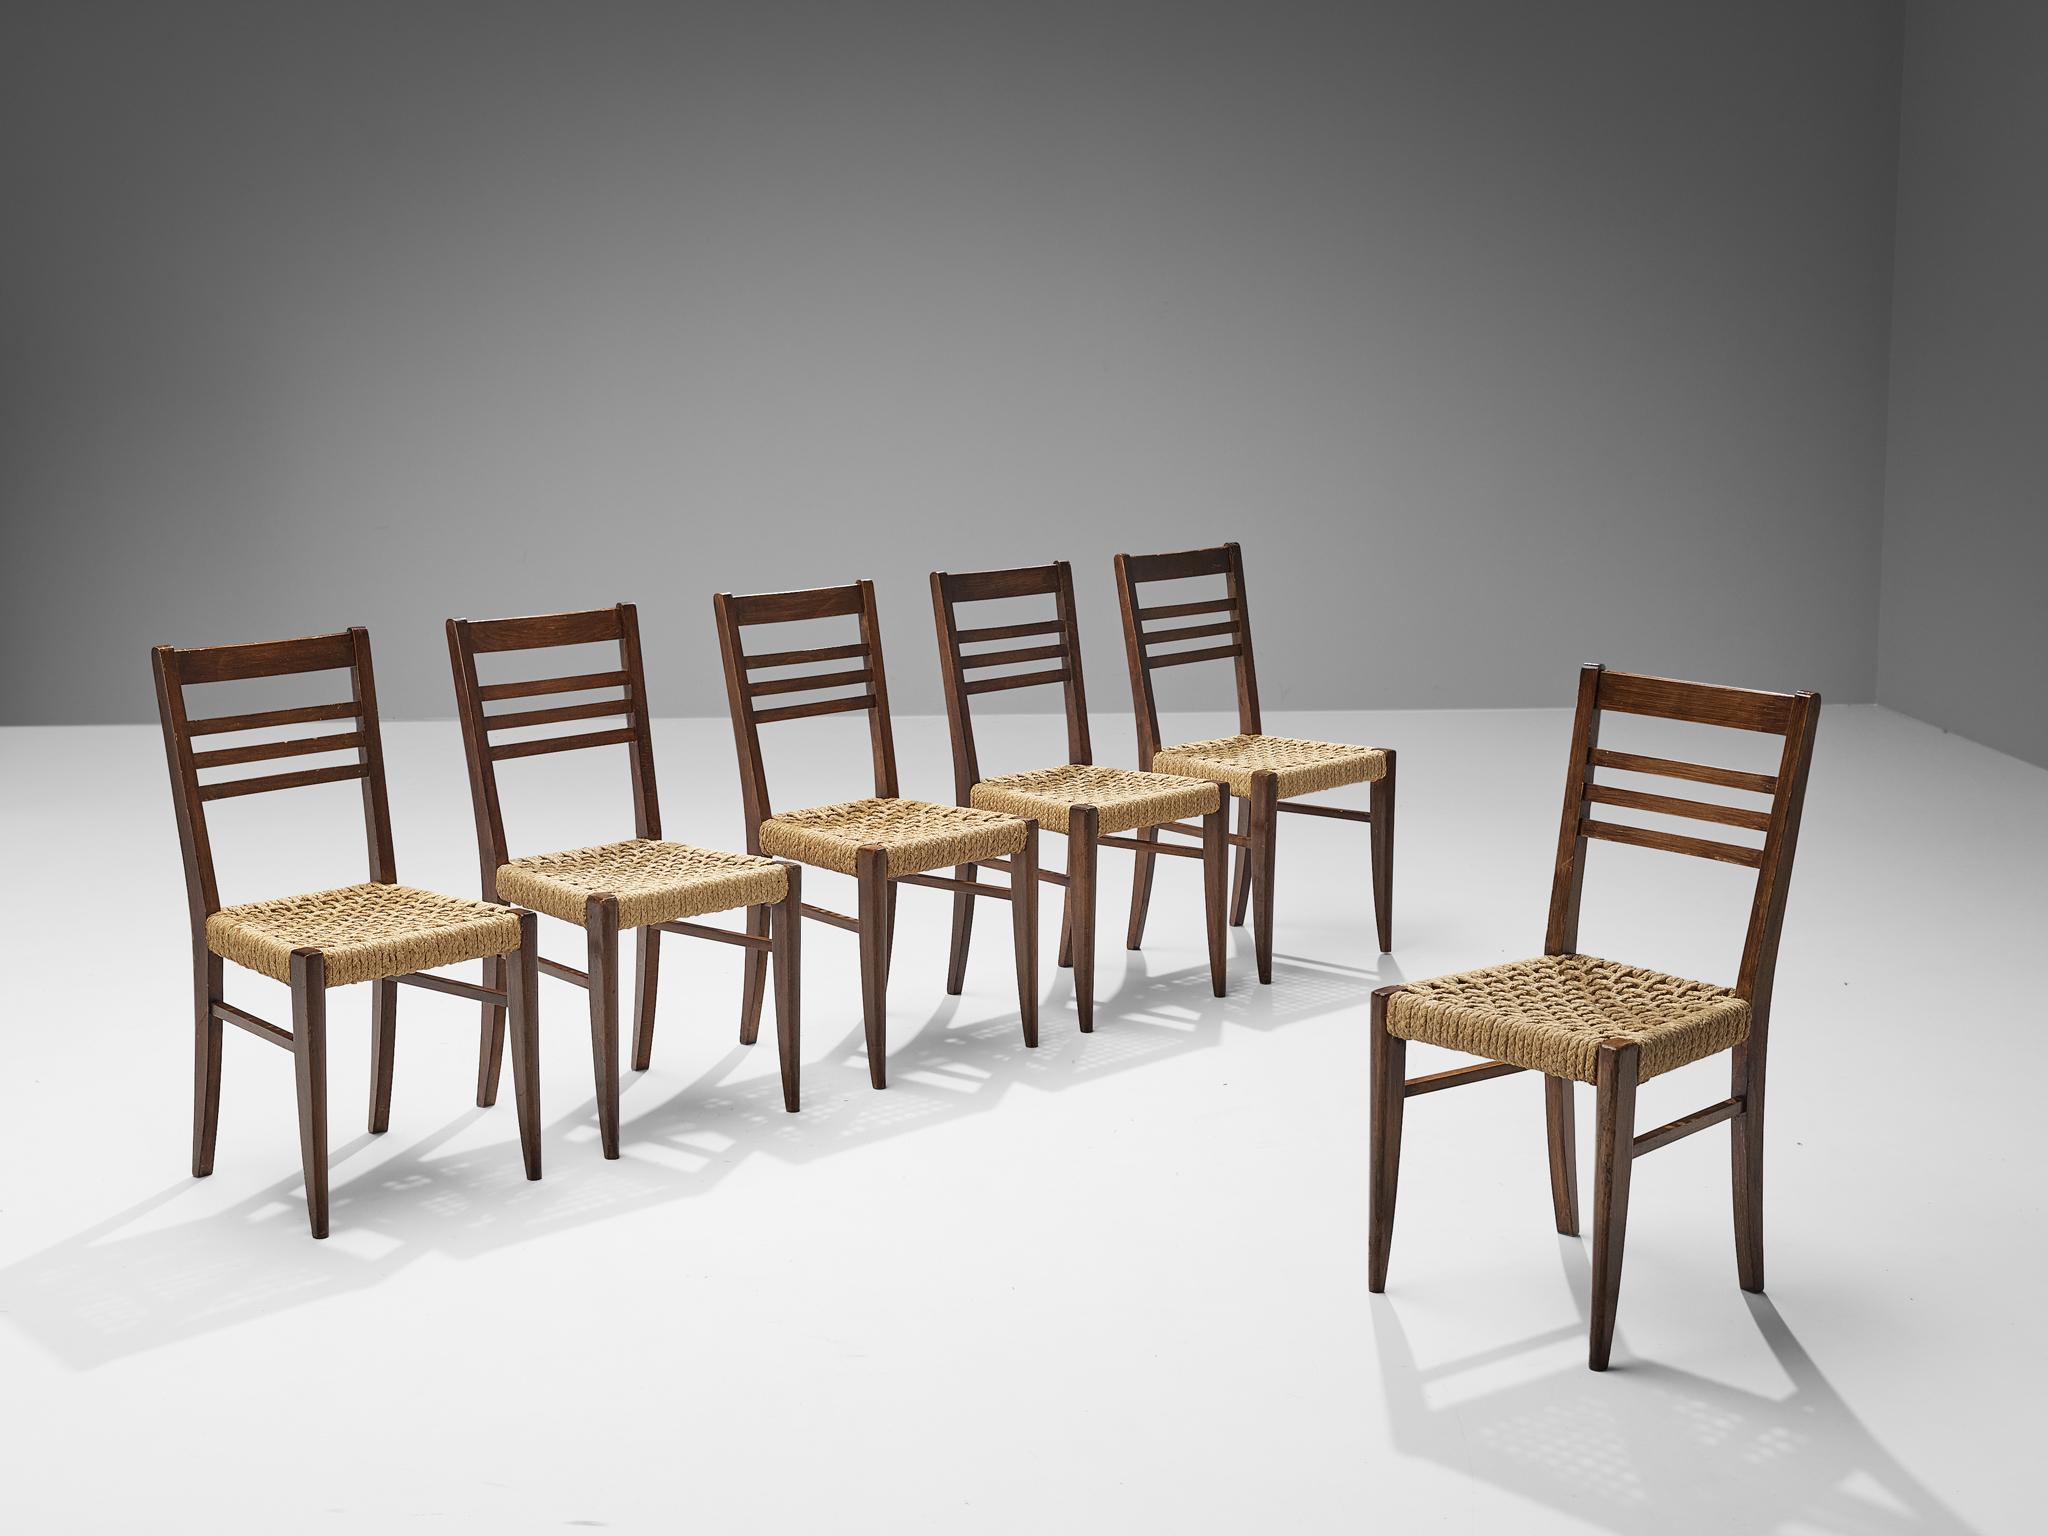 Adrien Audoux and Frida Minet for Vibo, set of six dining chairs, beech, rope hemp, France, late 1940s 

Set of six naturalistic dining chairs designed by Adrien Audoux and Frida Minet. The seating and backrest are made of woven hemp from the